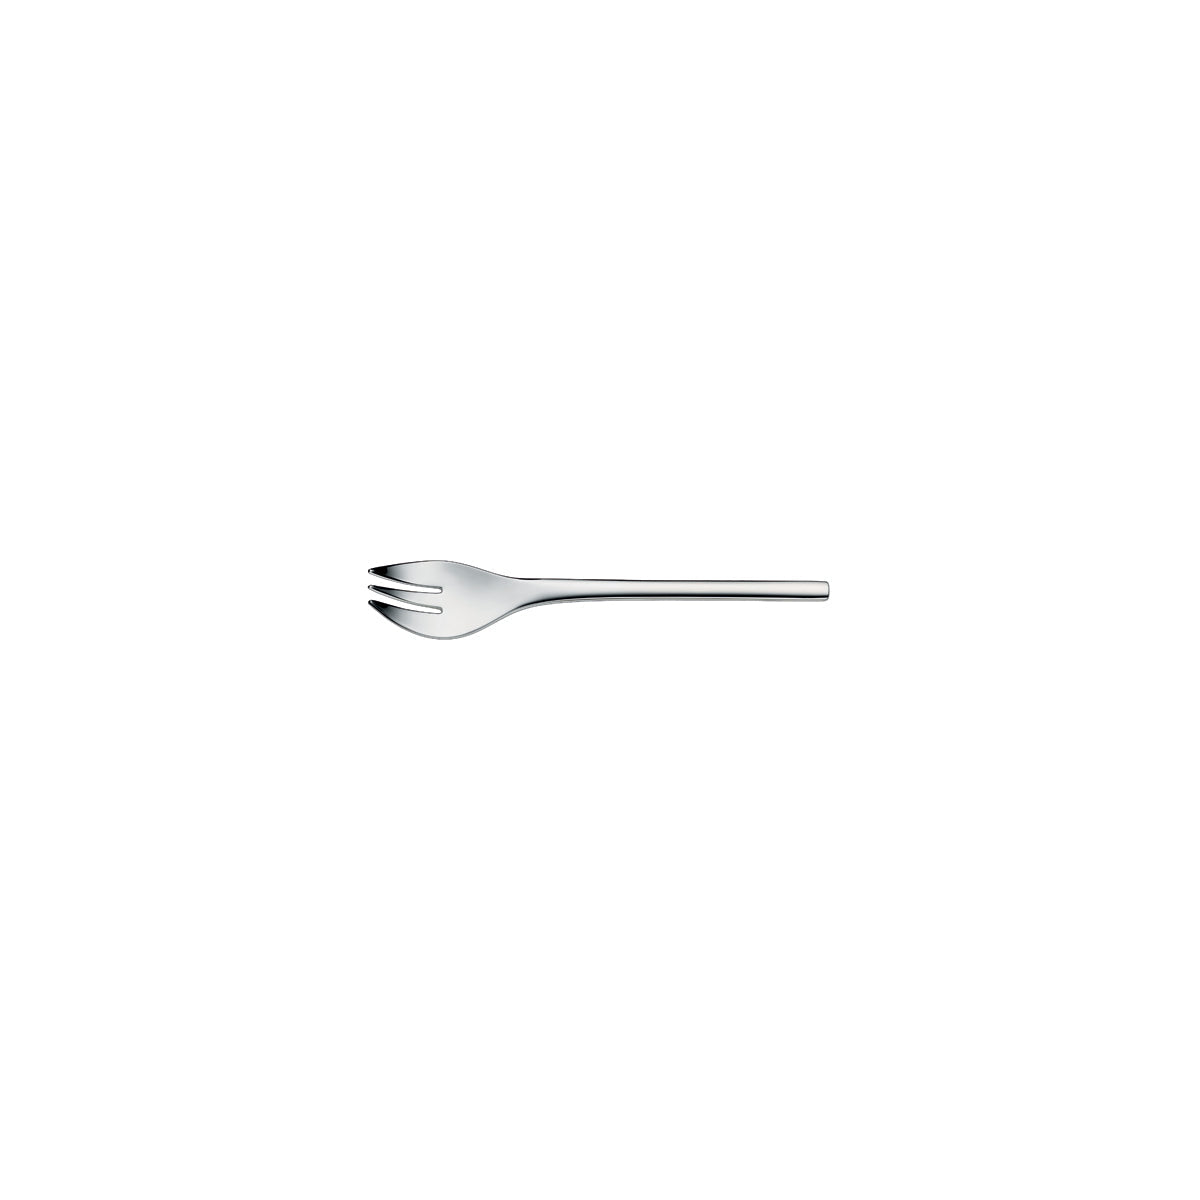 54.7240.6040 WMF Nordic Oyster Fork Stainless Steel Tomkin Australia Hospitality Supplies